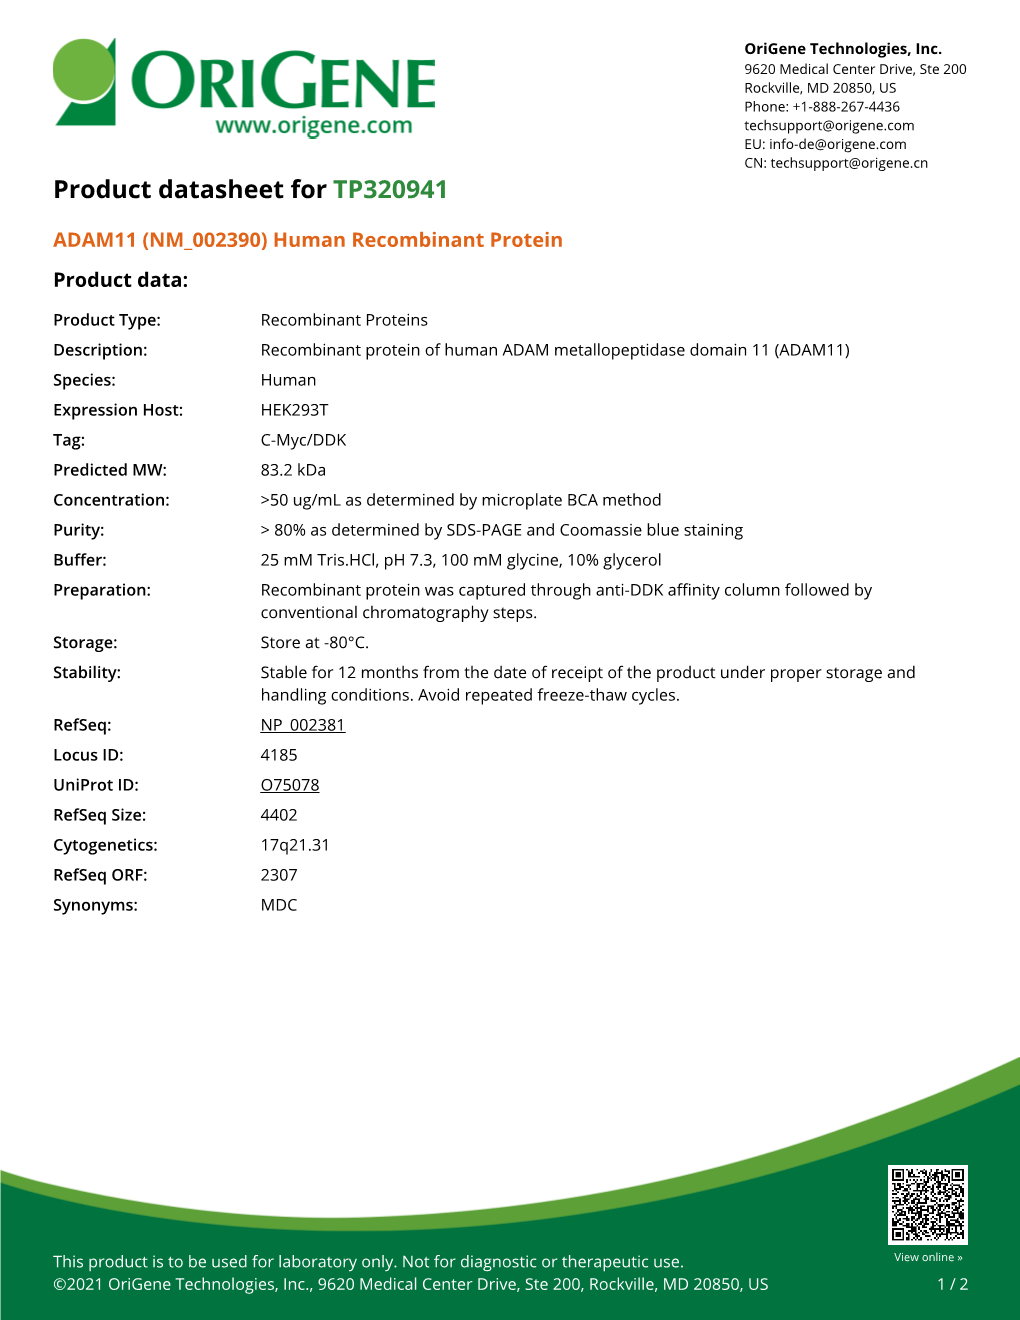 ADAM11 (NM 002390) Human Recombinant Protein Product Data